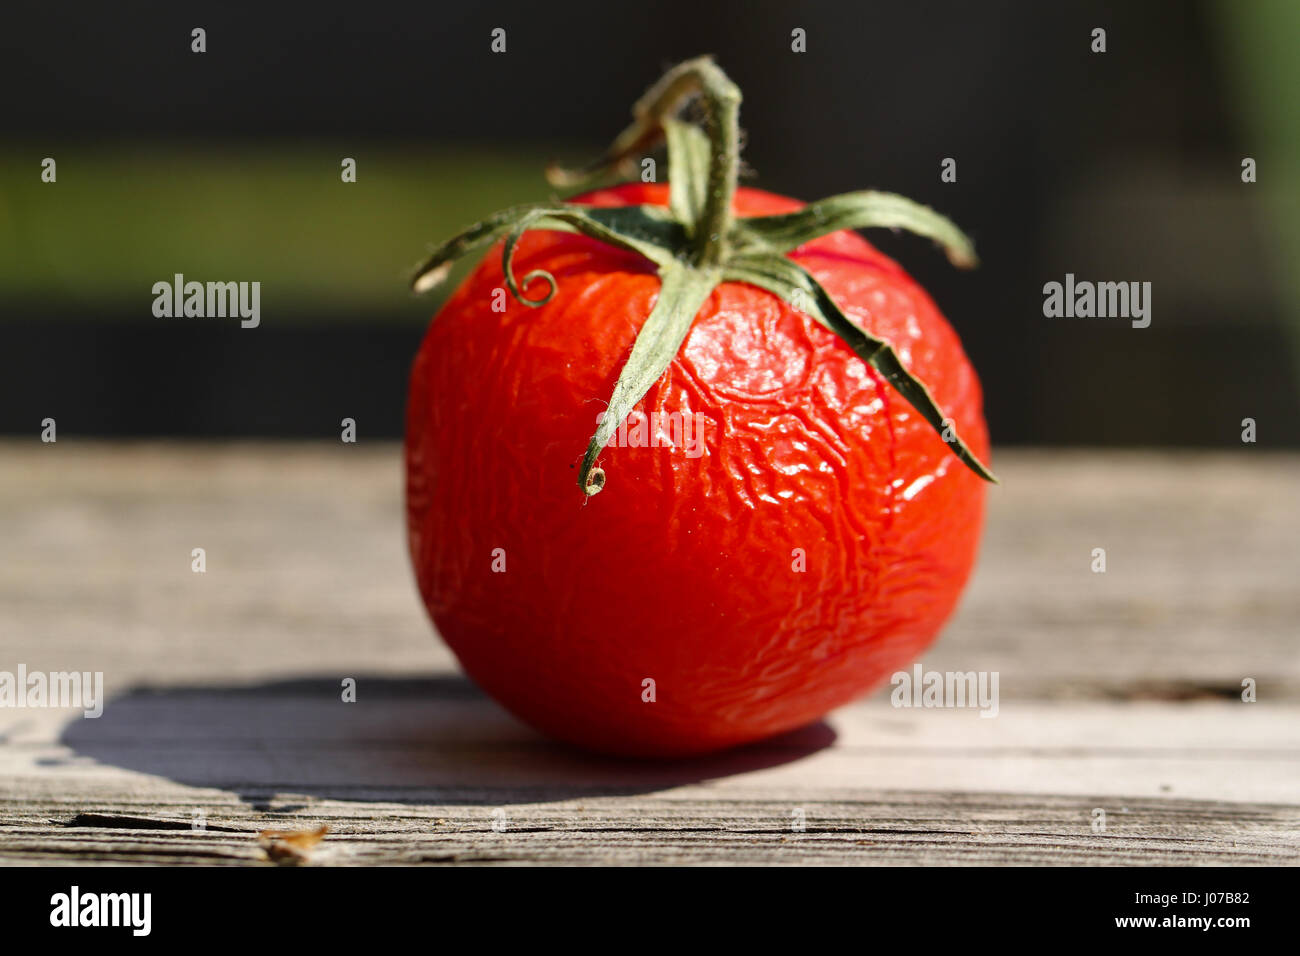 Food. A single plump, wrinkled ripe red tomato with stem attached sits alone on a wooden plank in the sun. Stock Photo